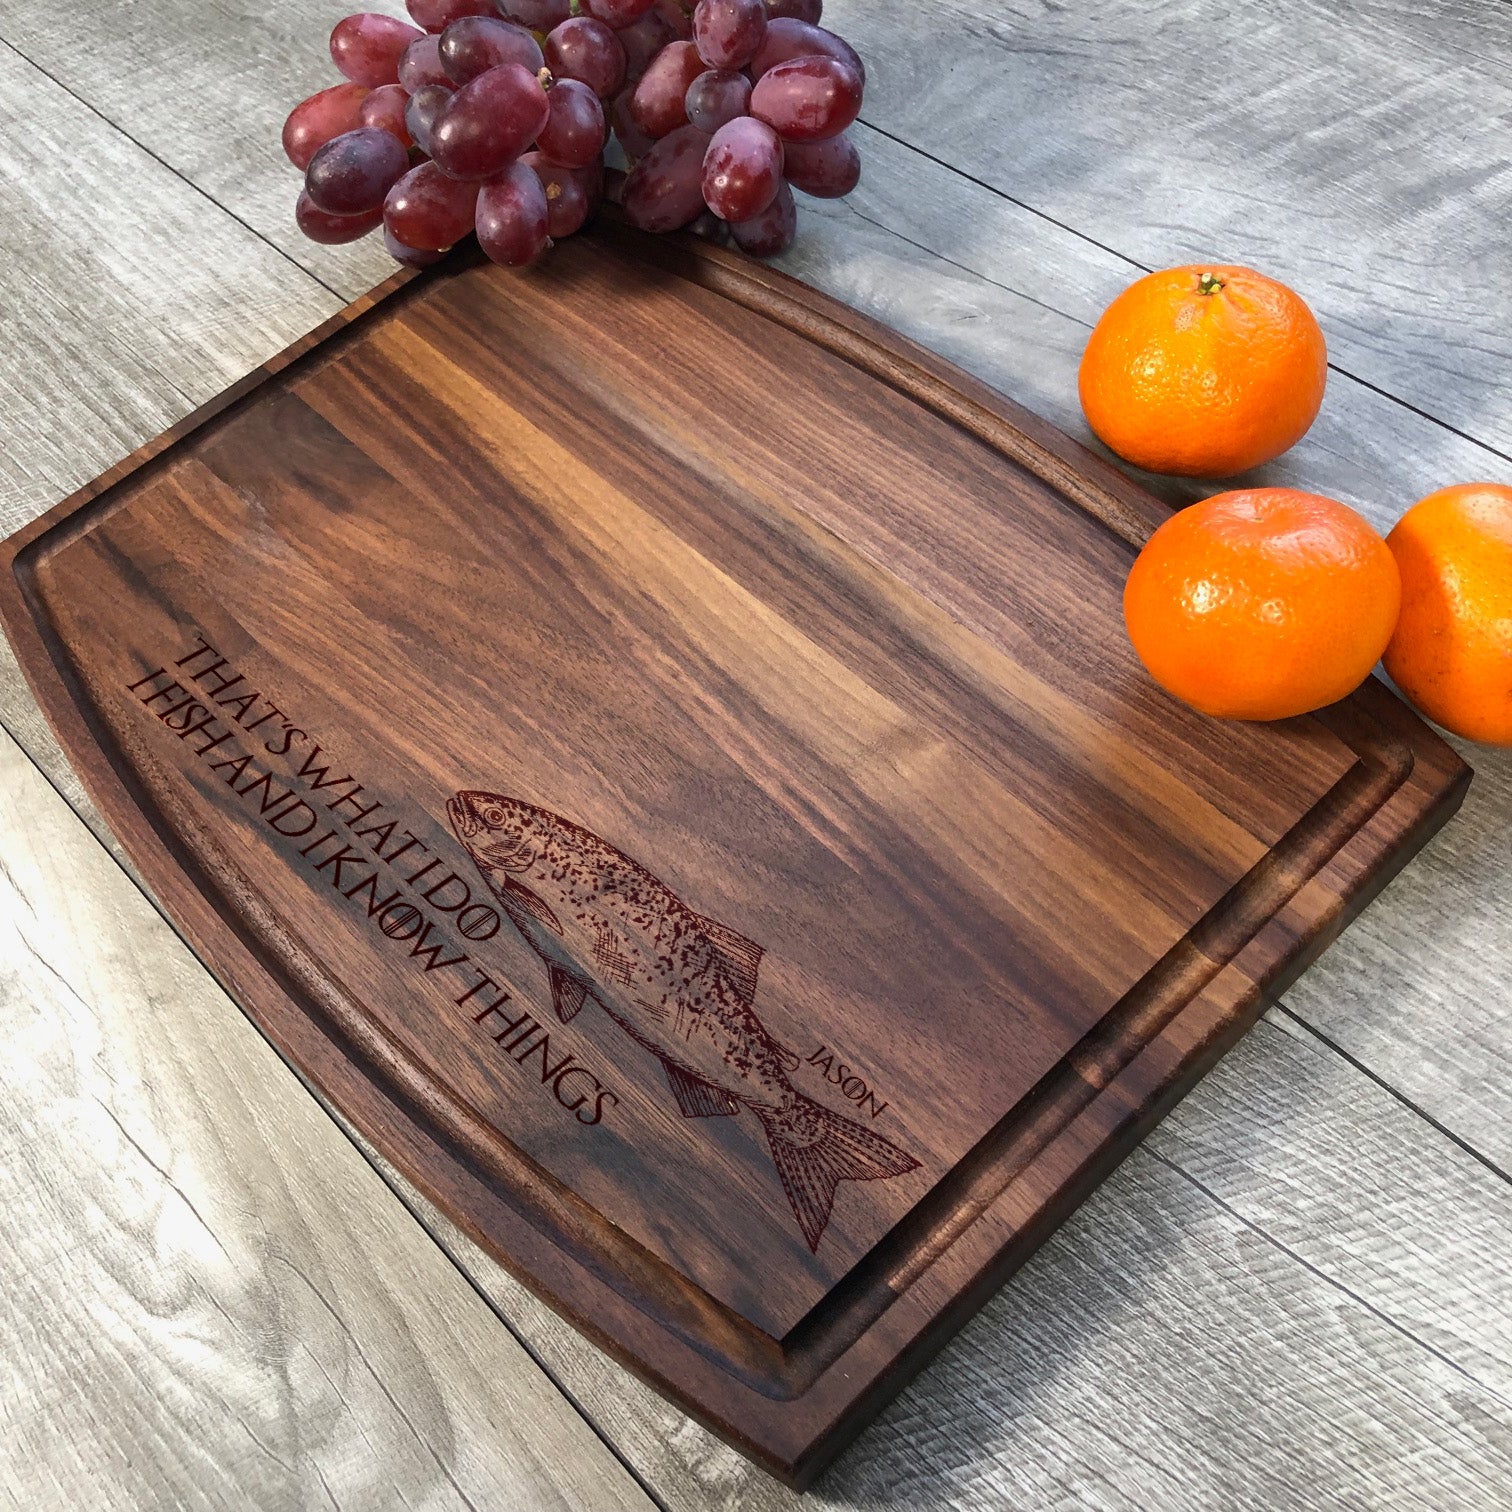 Fish Shaped-Daily Bread Wood Engraved Cutting Board Personalized